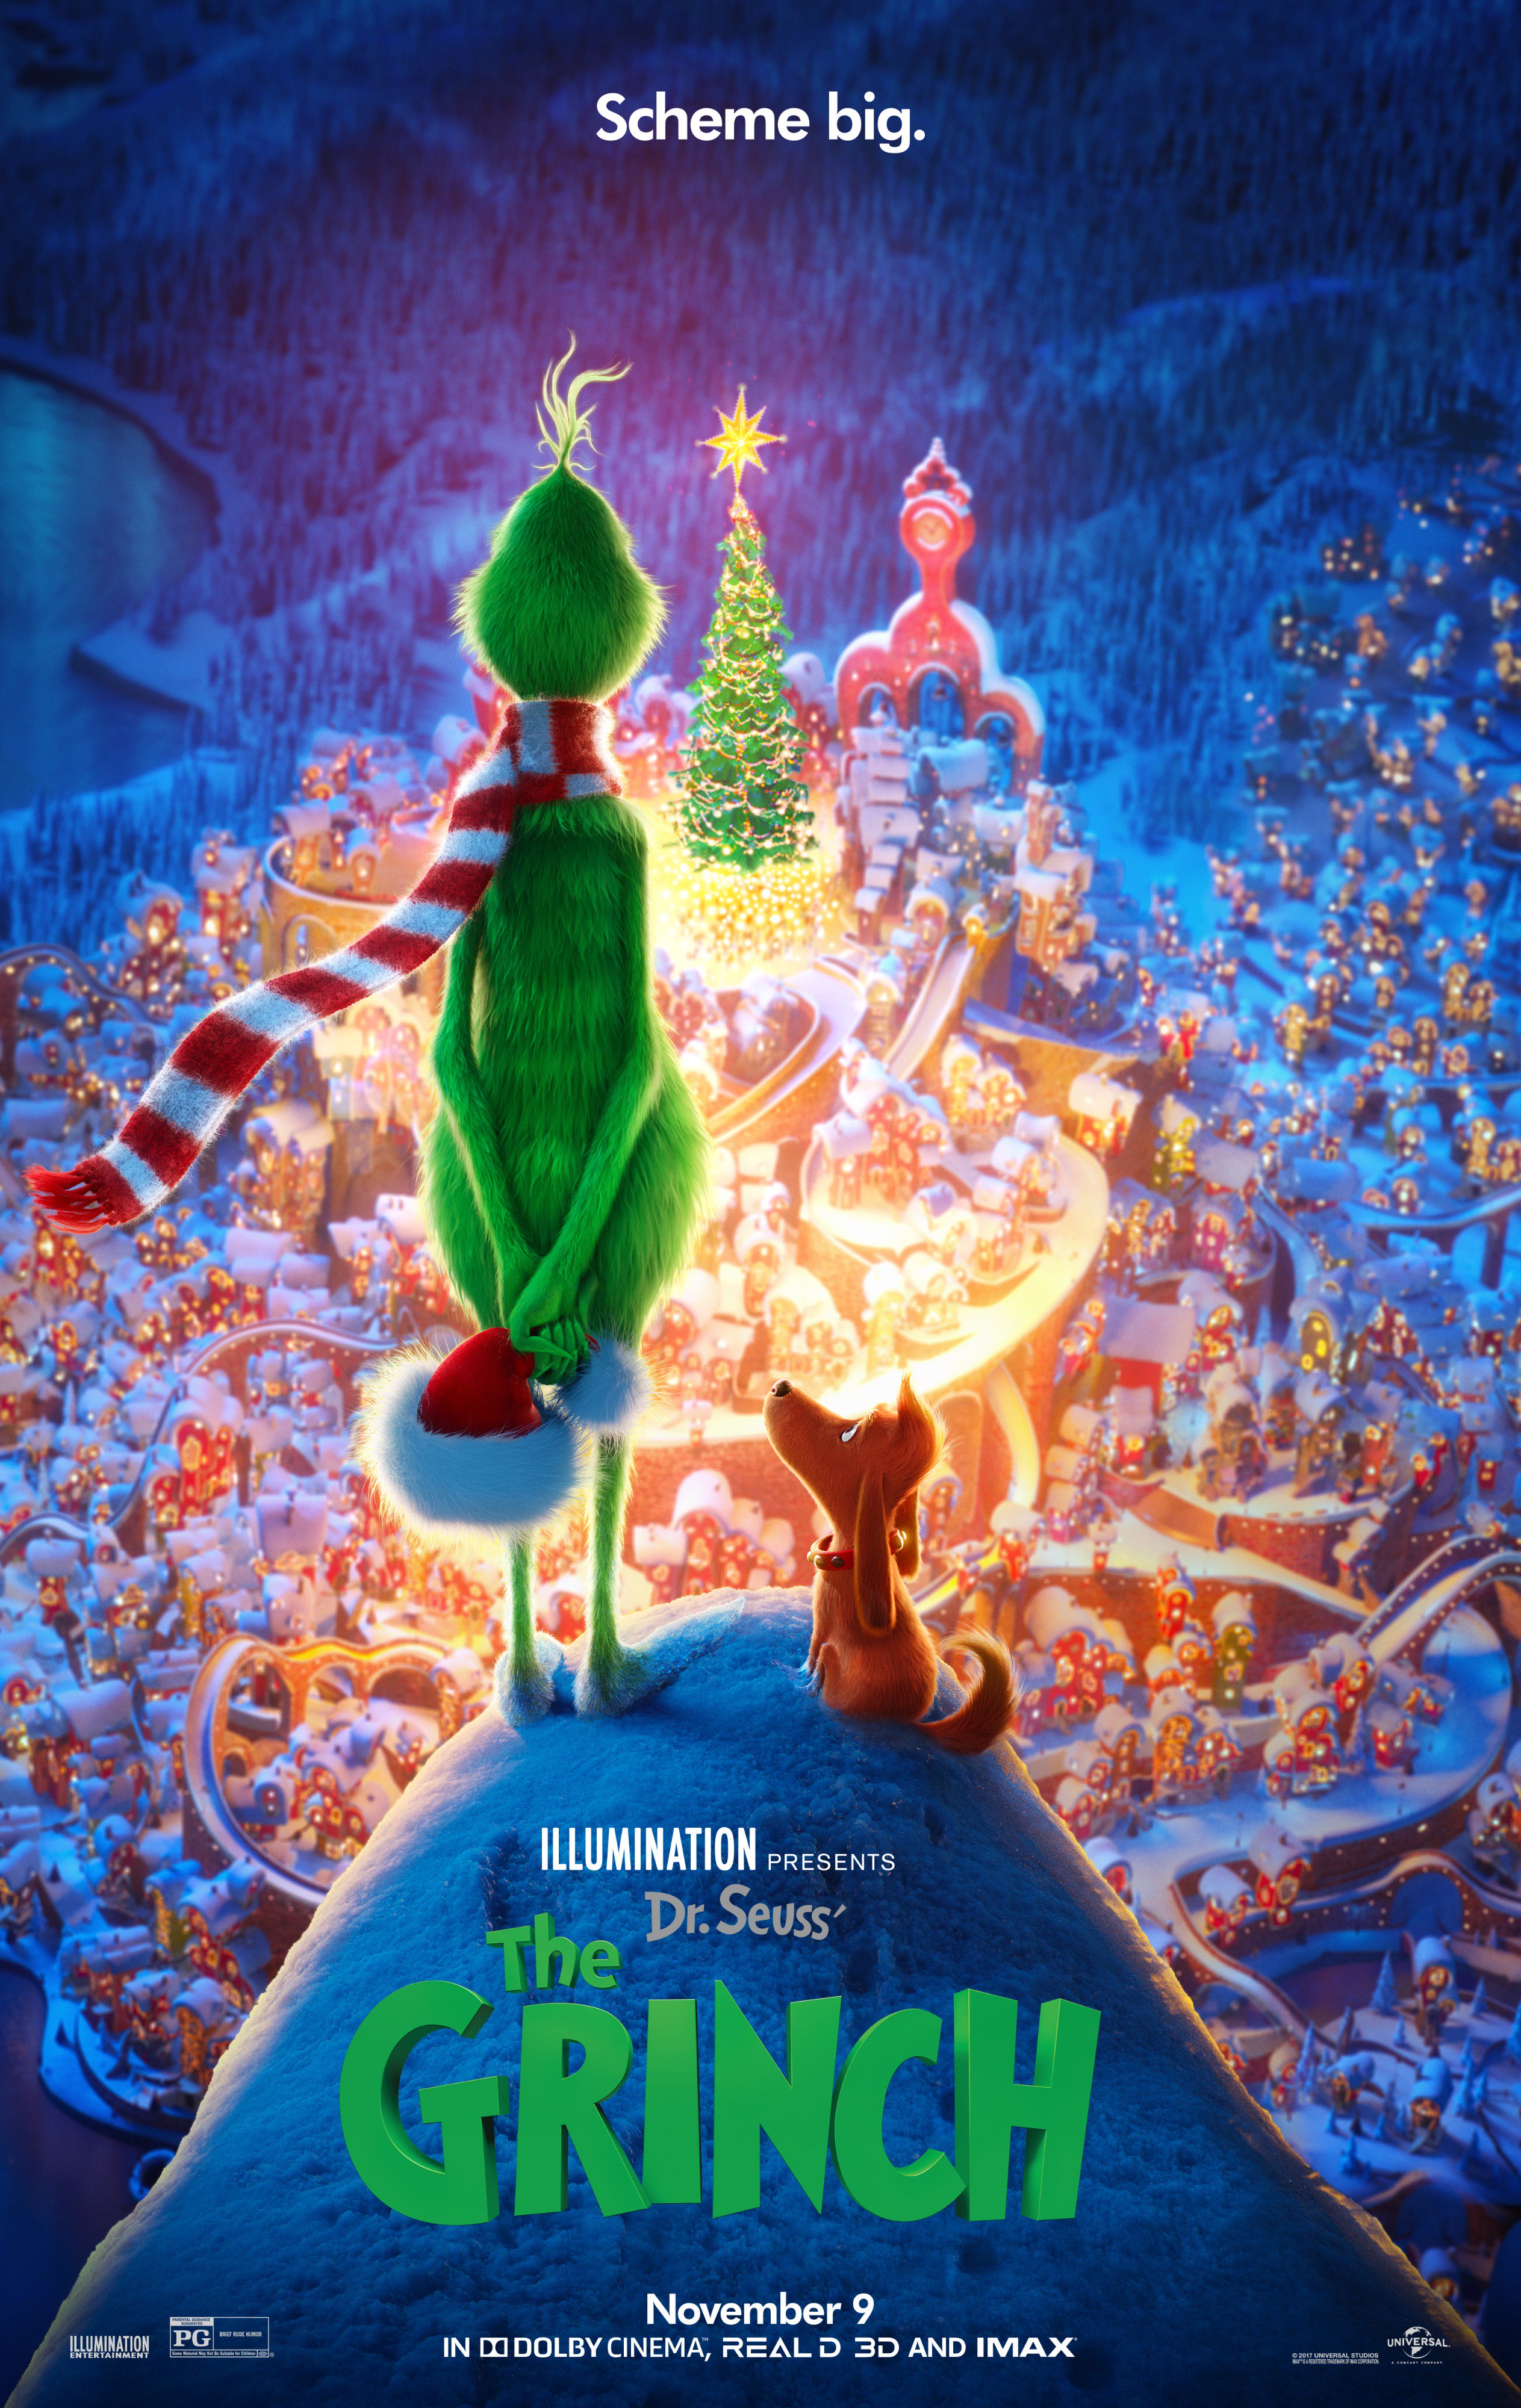 The Grinch – Did We Really Need Another Version of This Story?